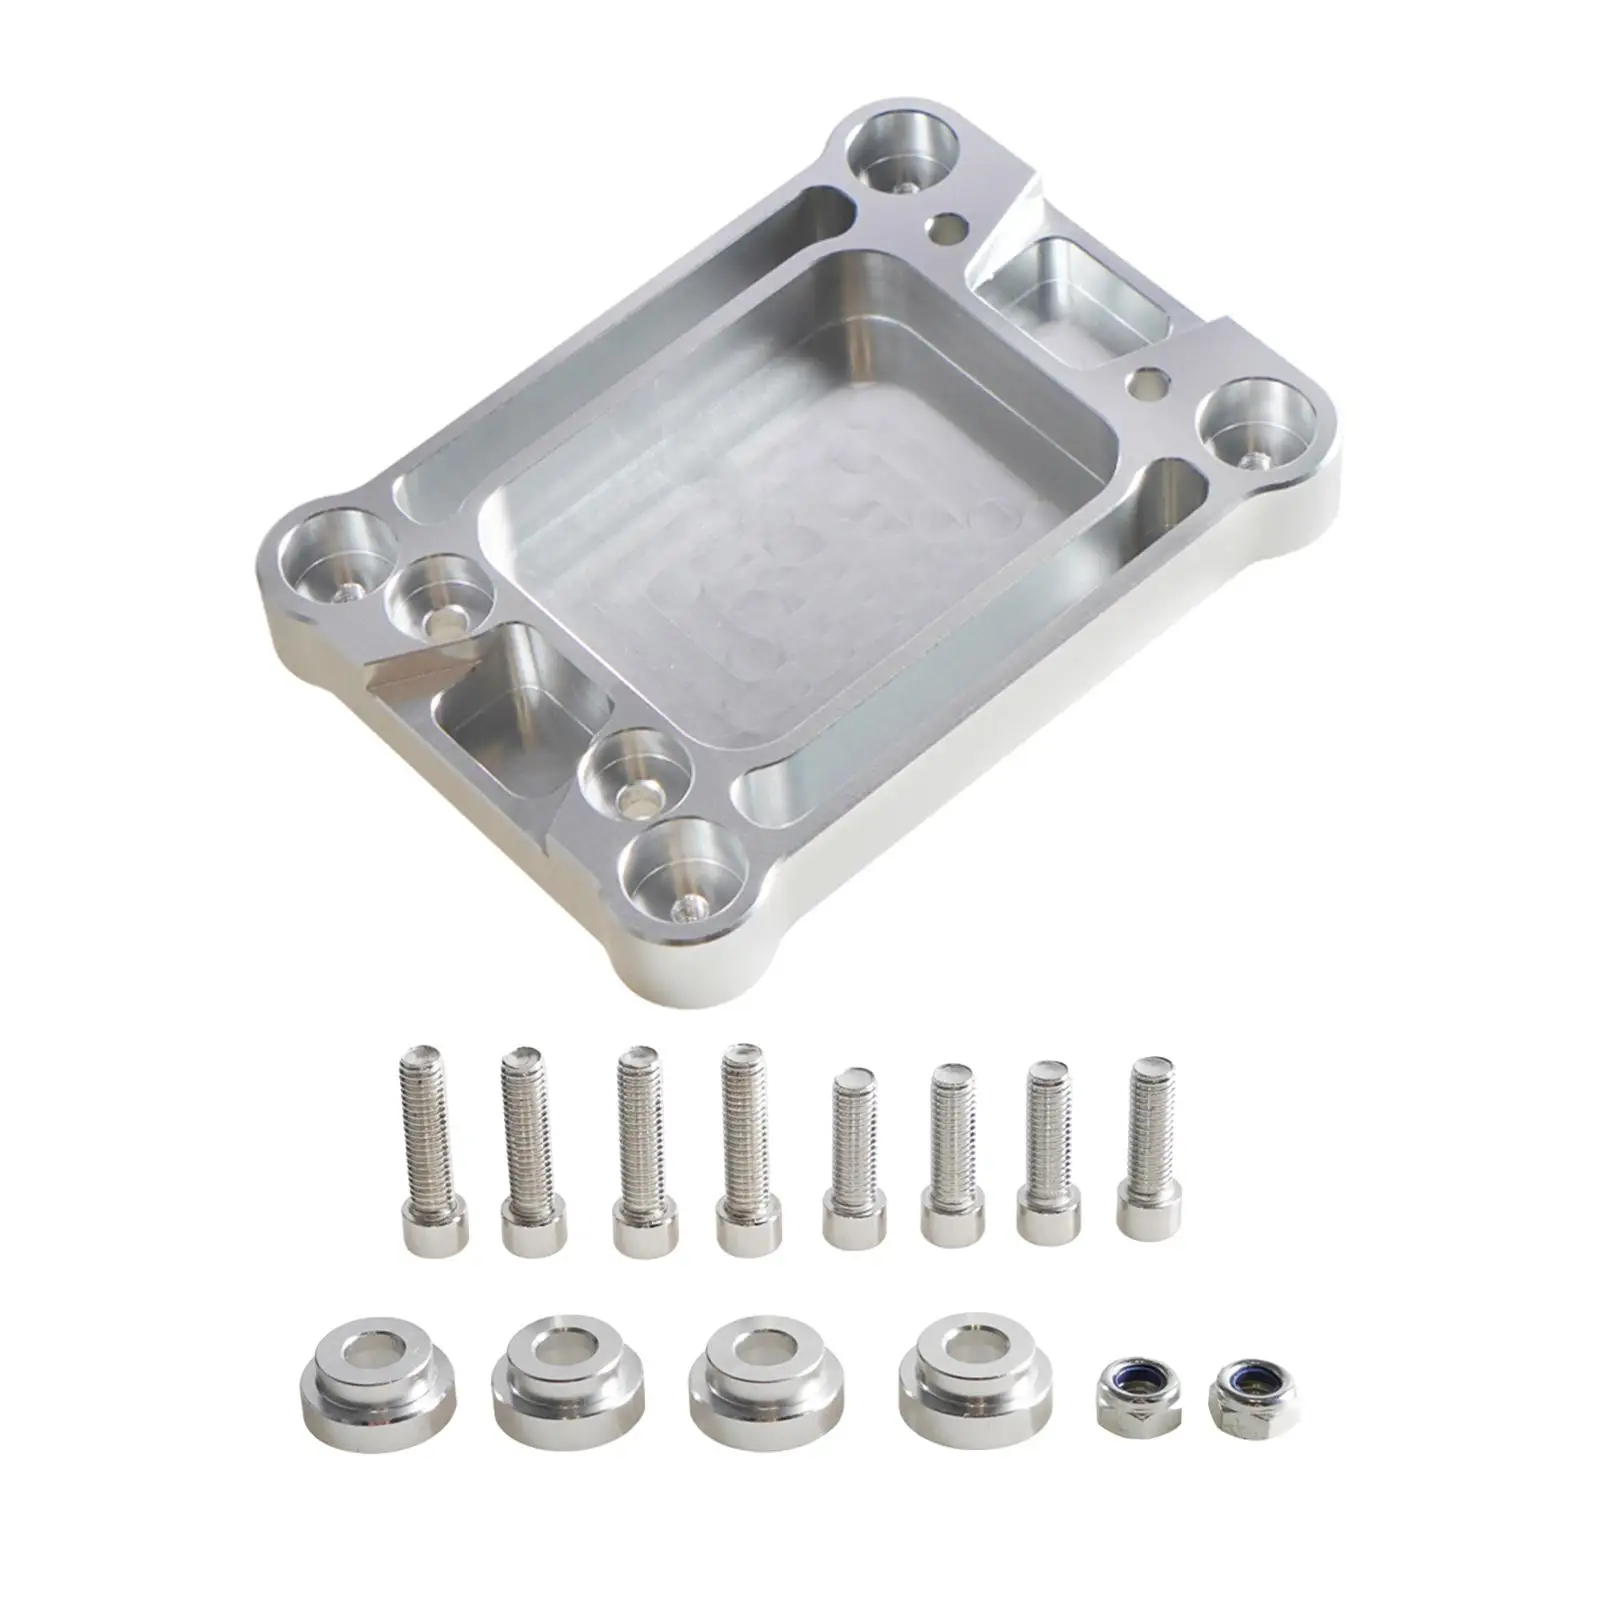 Billet Shifter Box Base Plate Durable Replacement Parts Shift Lever Base for Acura Integra 1994-2001 Civic 1988-2000